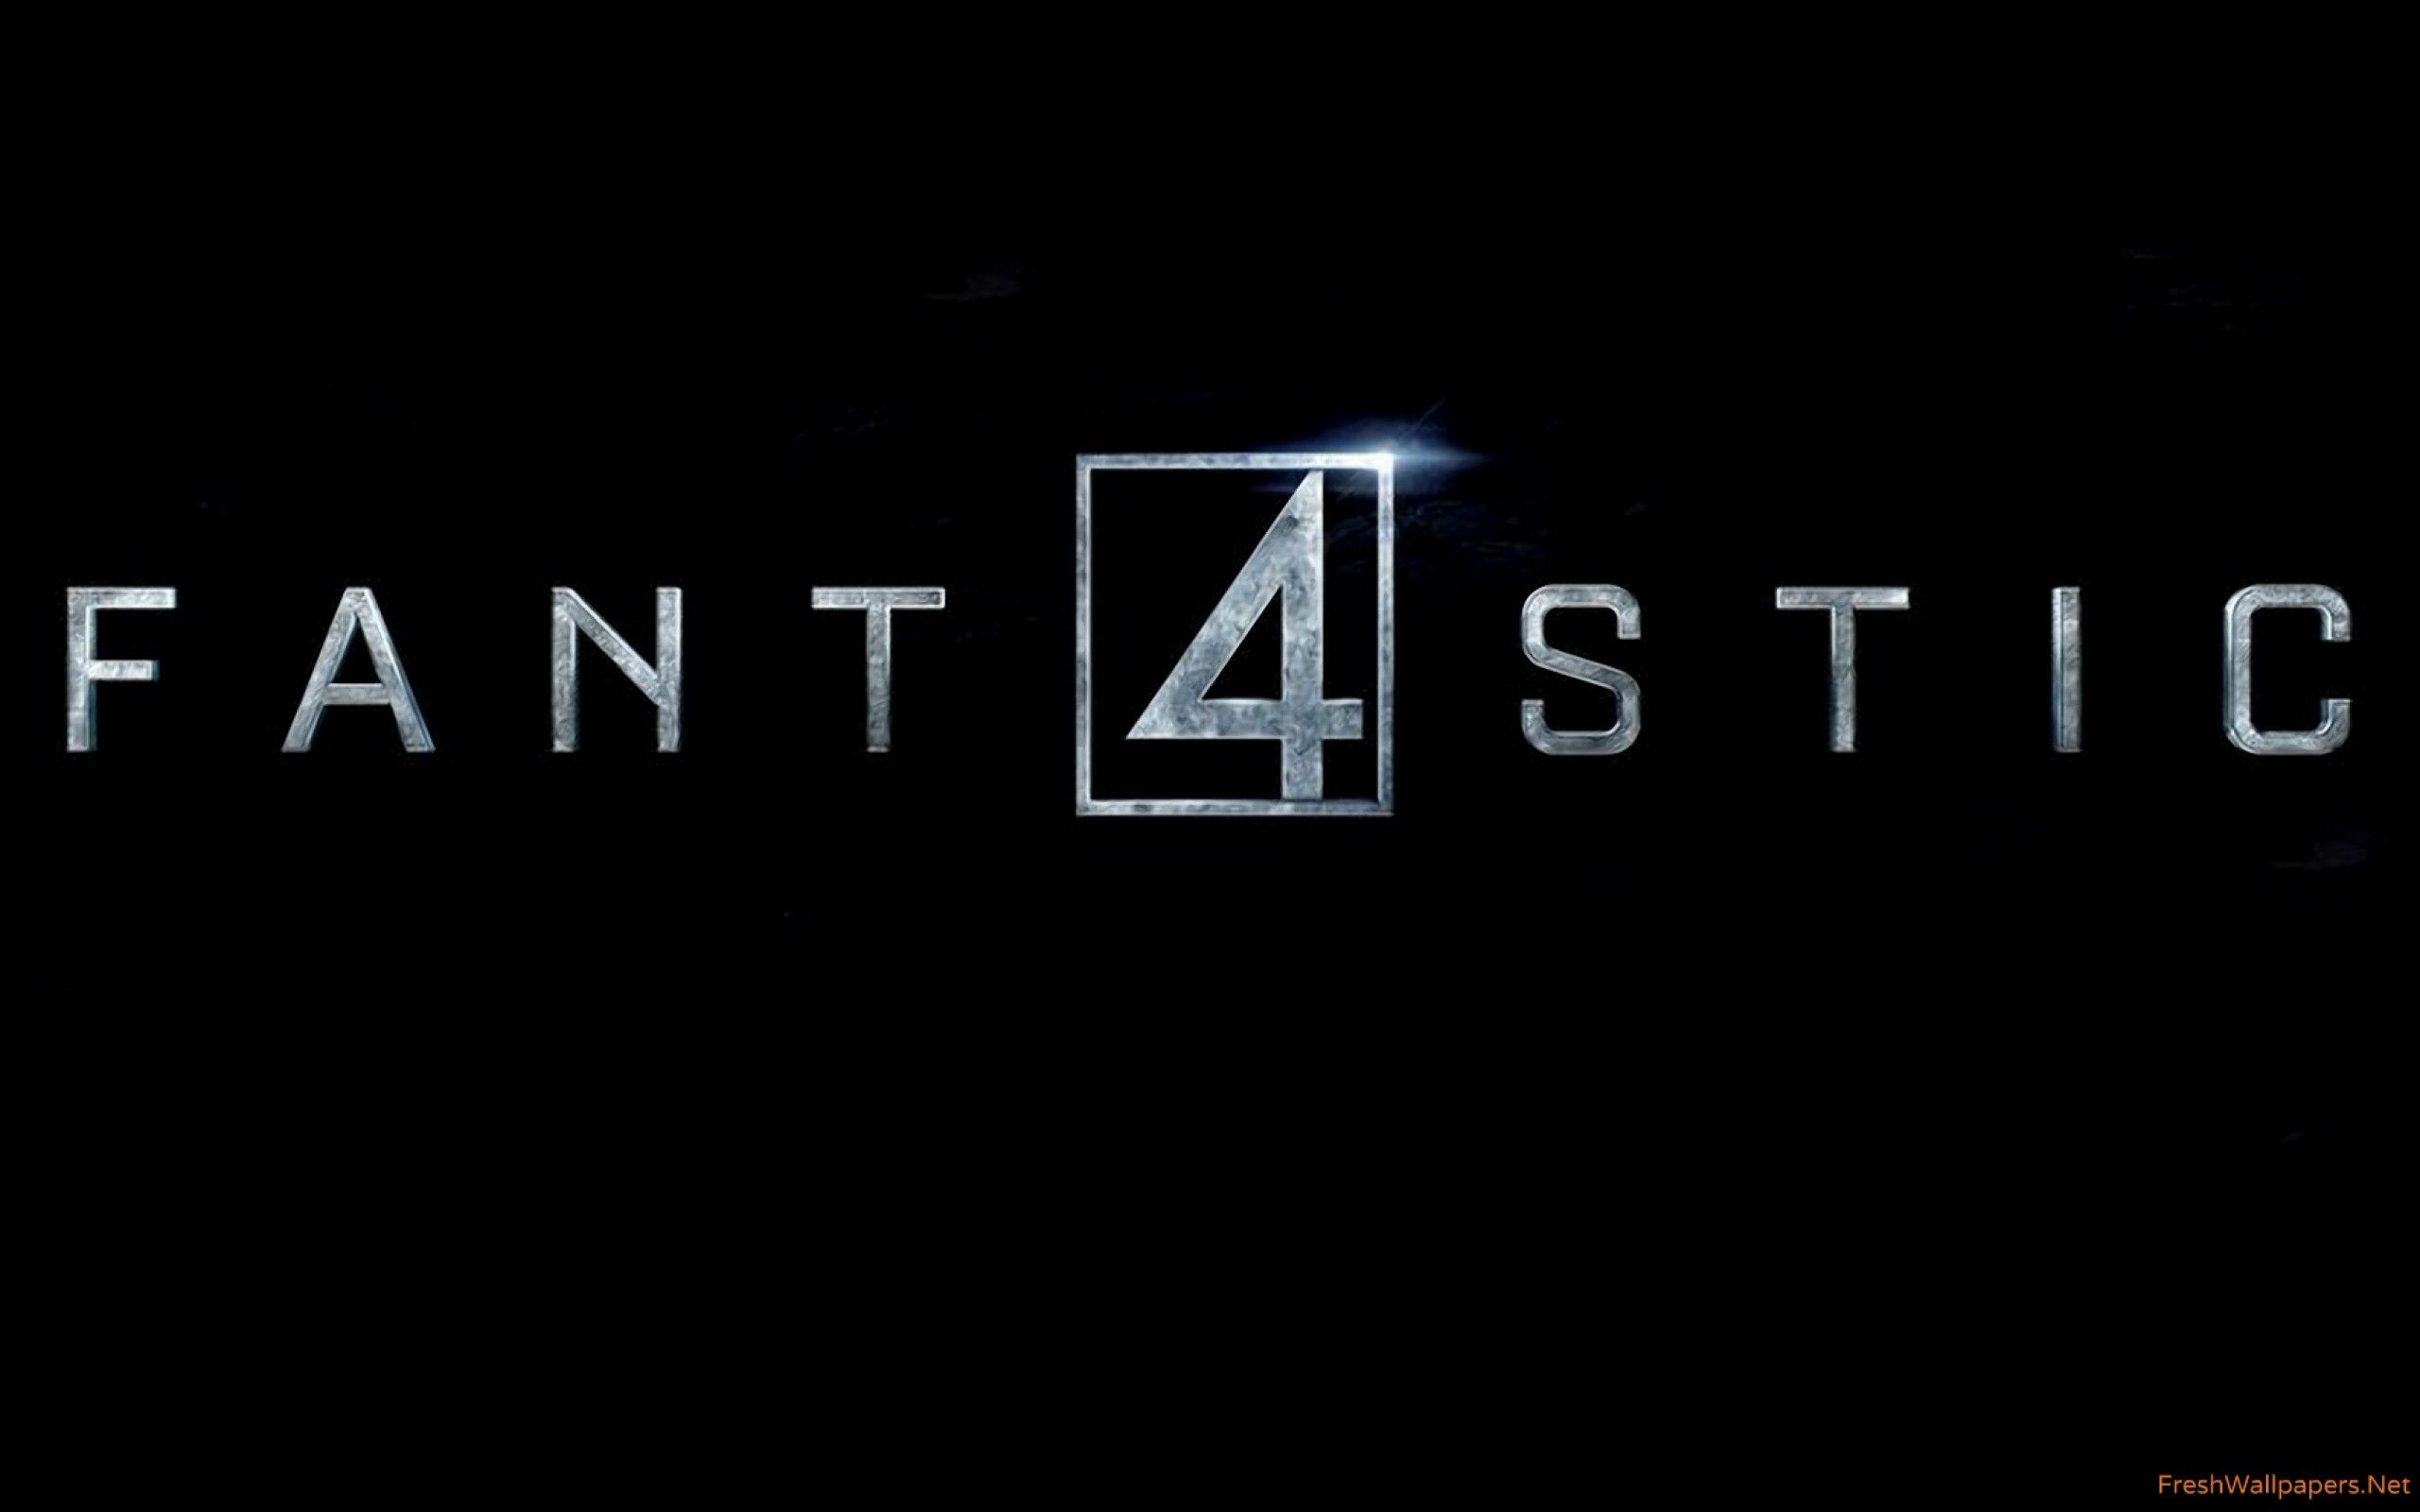 Fantastic 4: The plots deal with four main characters, known formally as Reed Richards, Susan Storm, Ben Grimm and Johnny Storm. 2560x1600 HD Background.